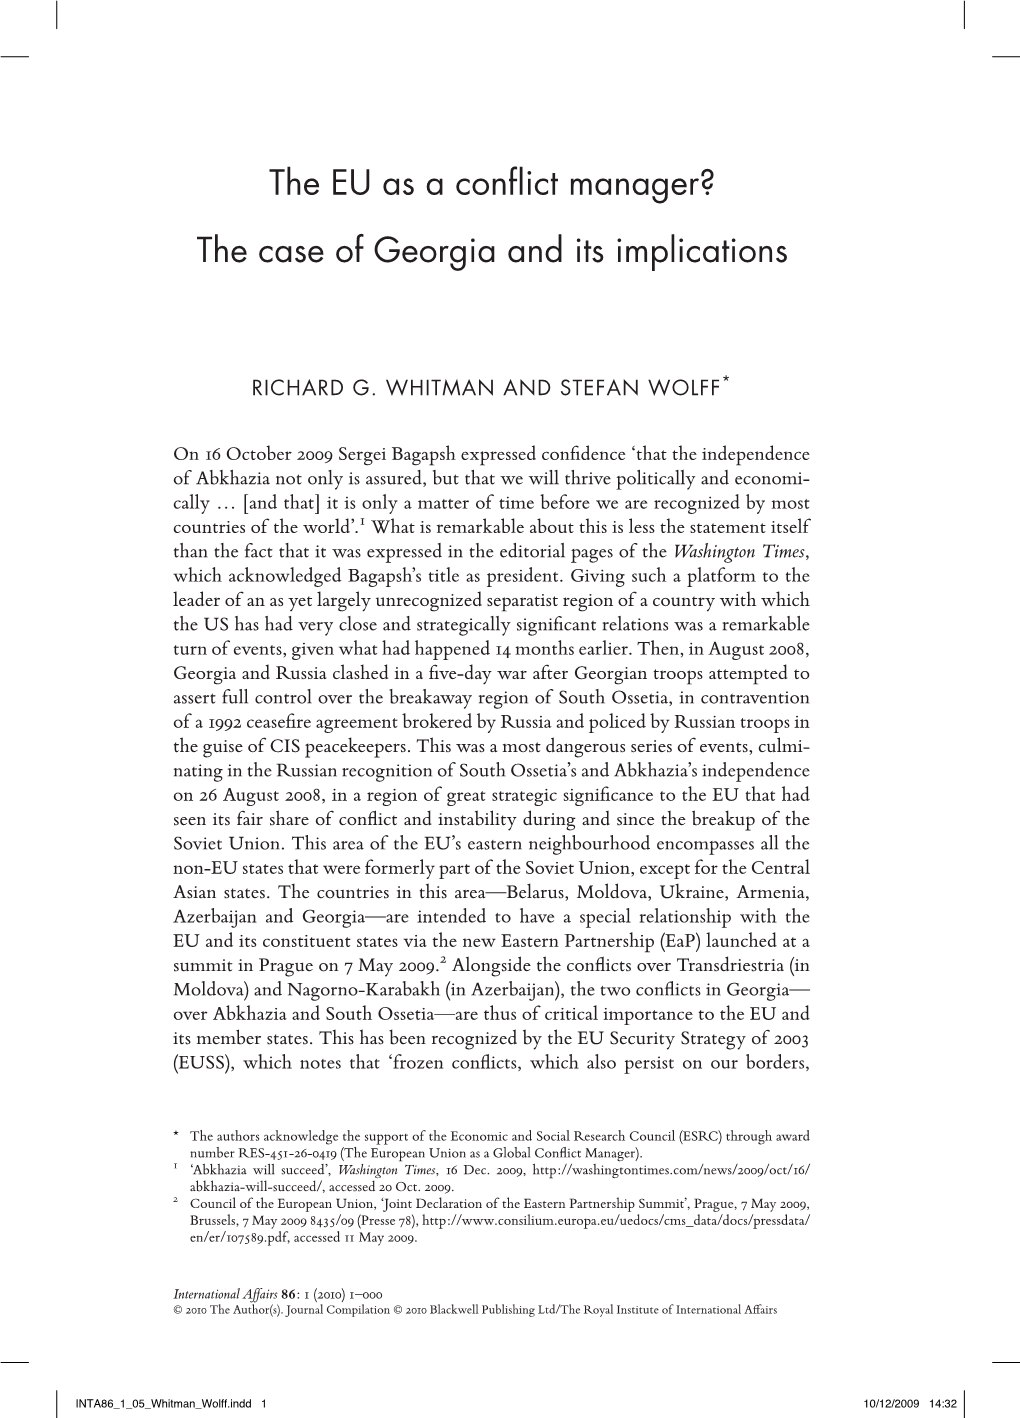 The EU As a Conflict Manager? the Case of Georgia and Its Implications